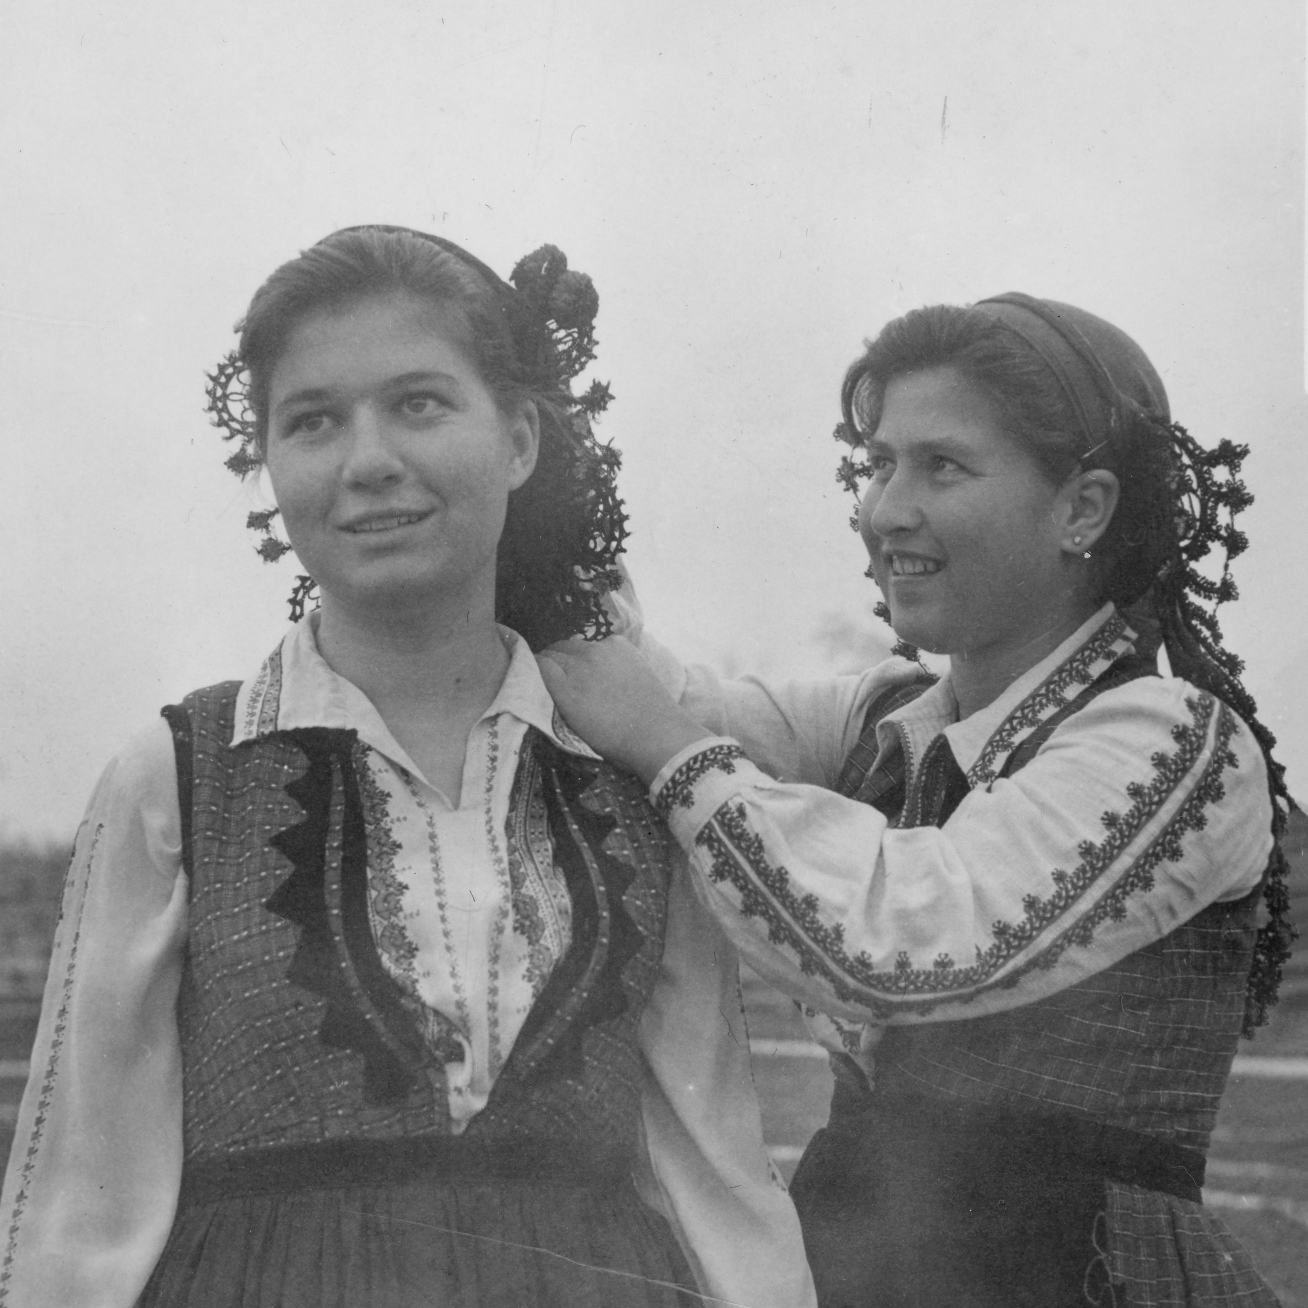 Brides in traditional costumes - black and white photo.